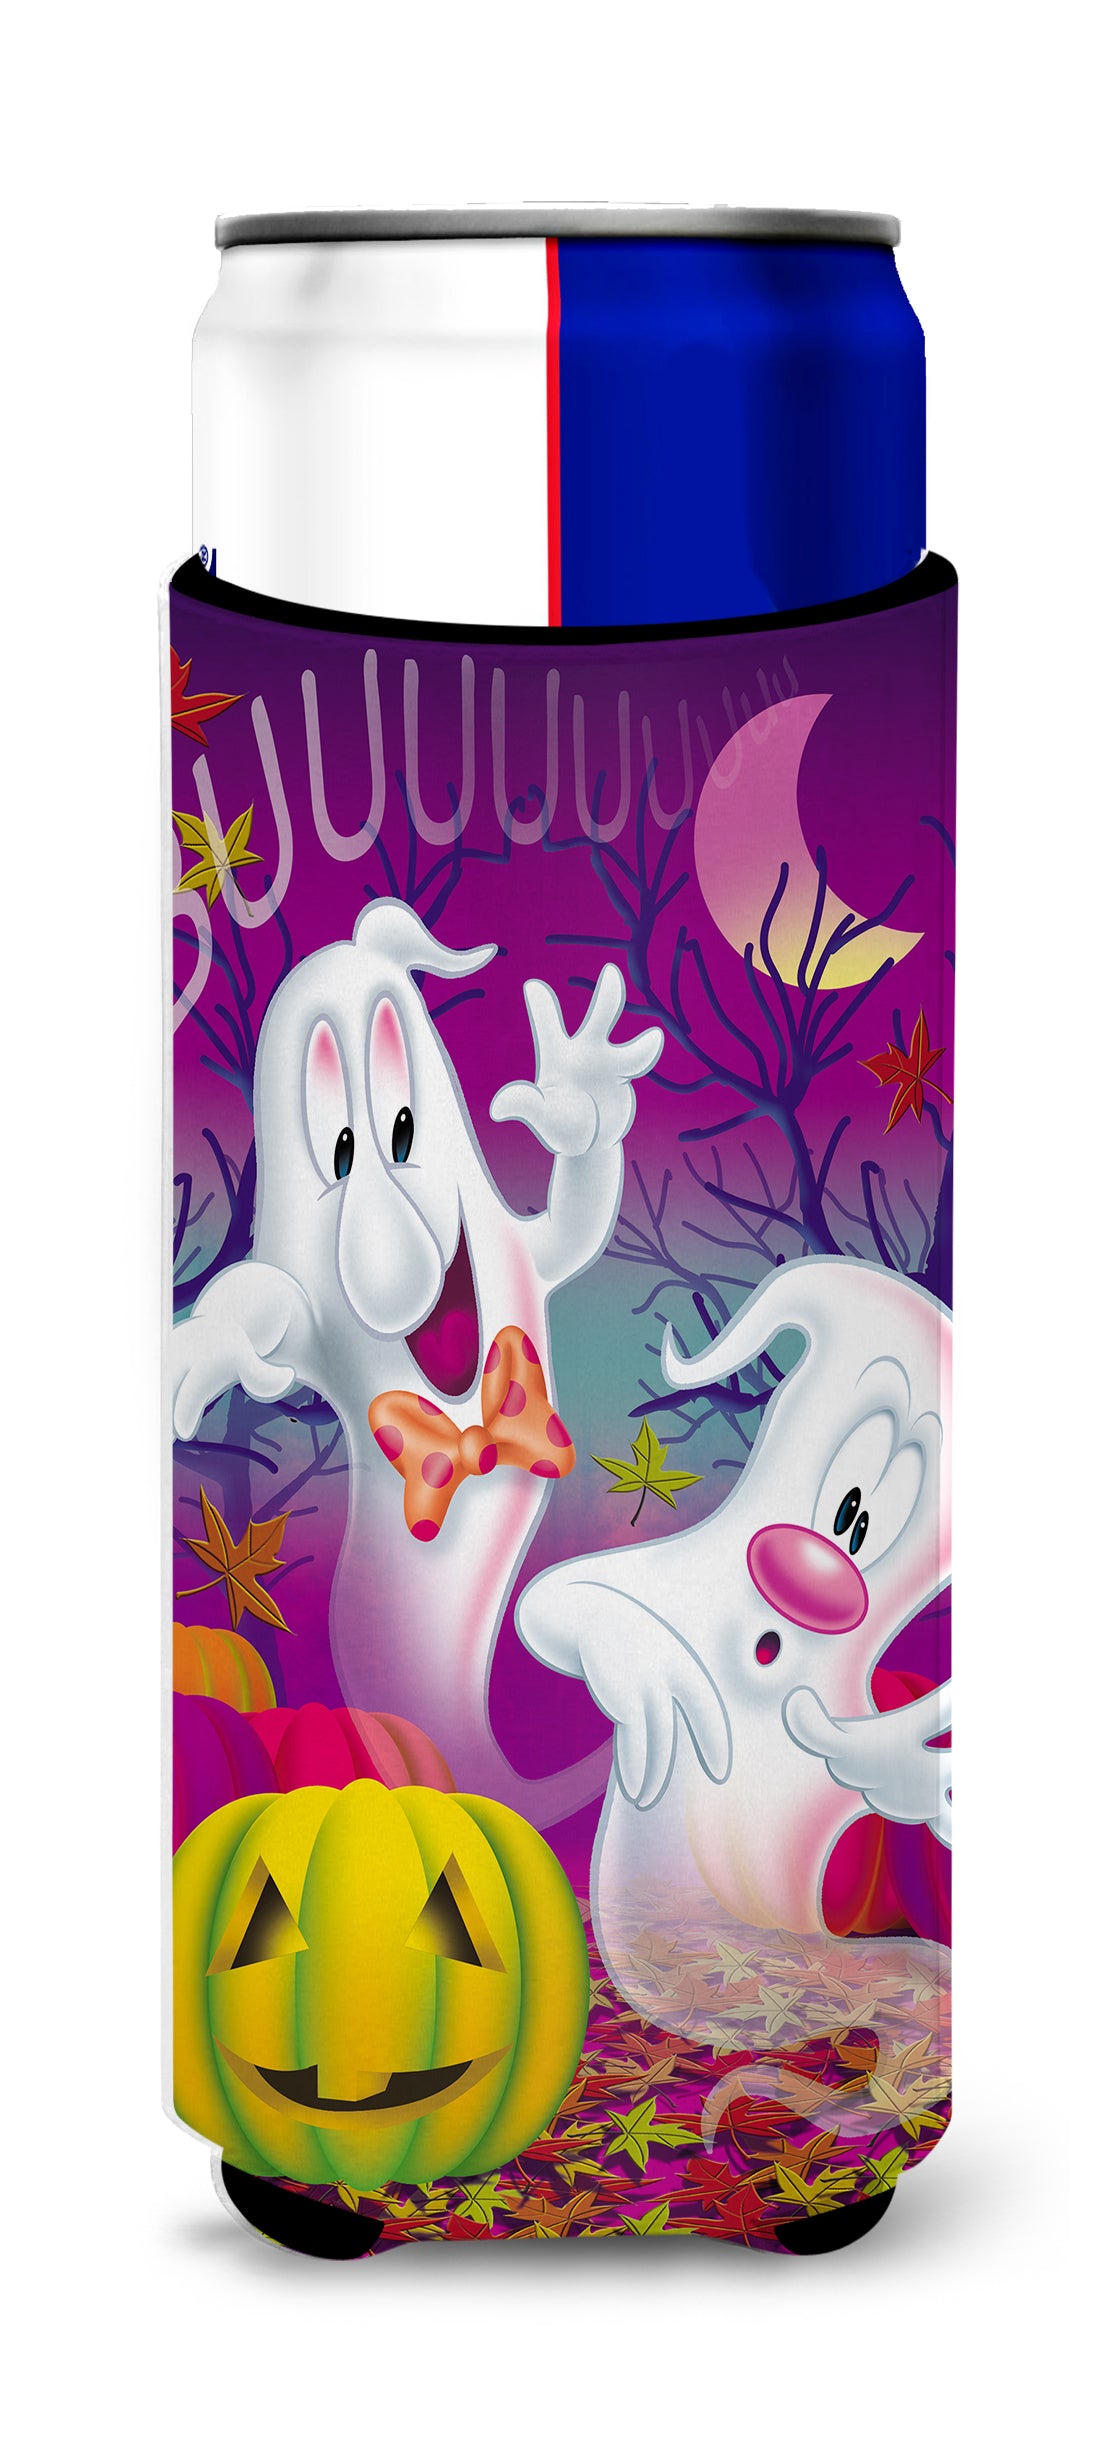 Buuu Ghosts Halloween Ultra Beverage Insulators for slim cans APH3798MUK  the-store.com.